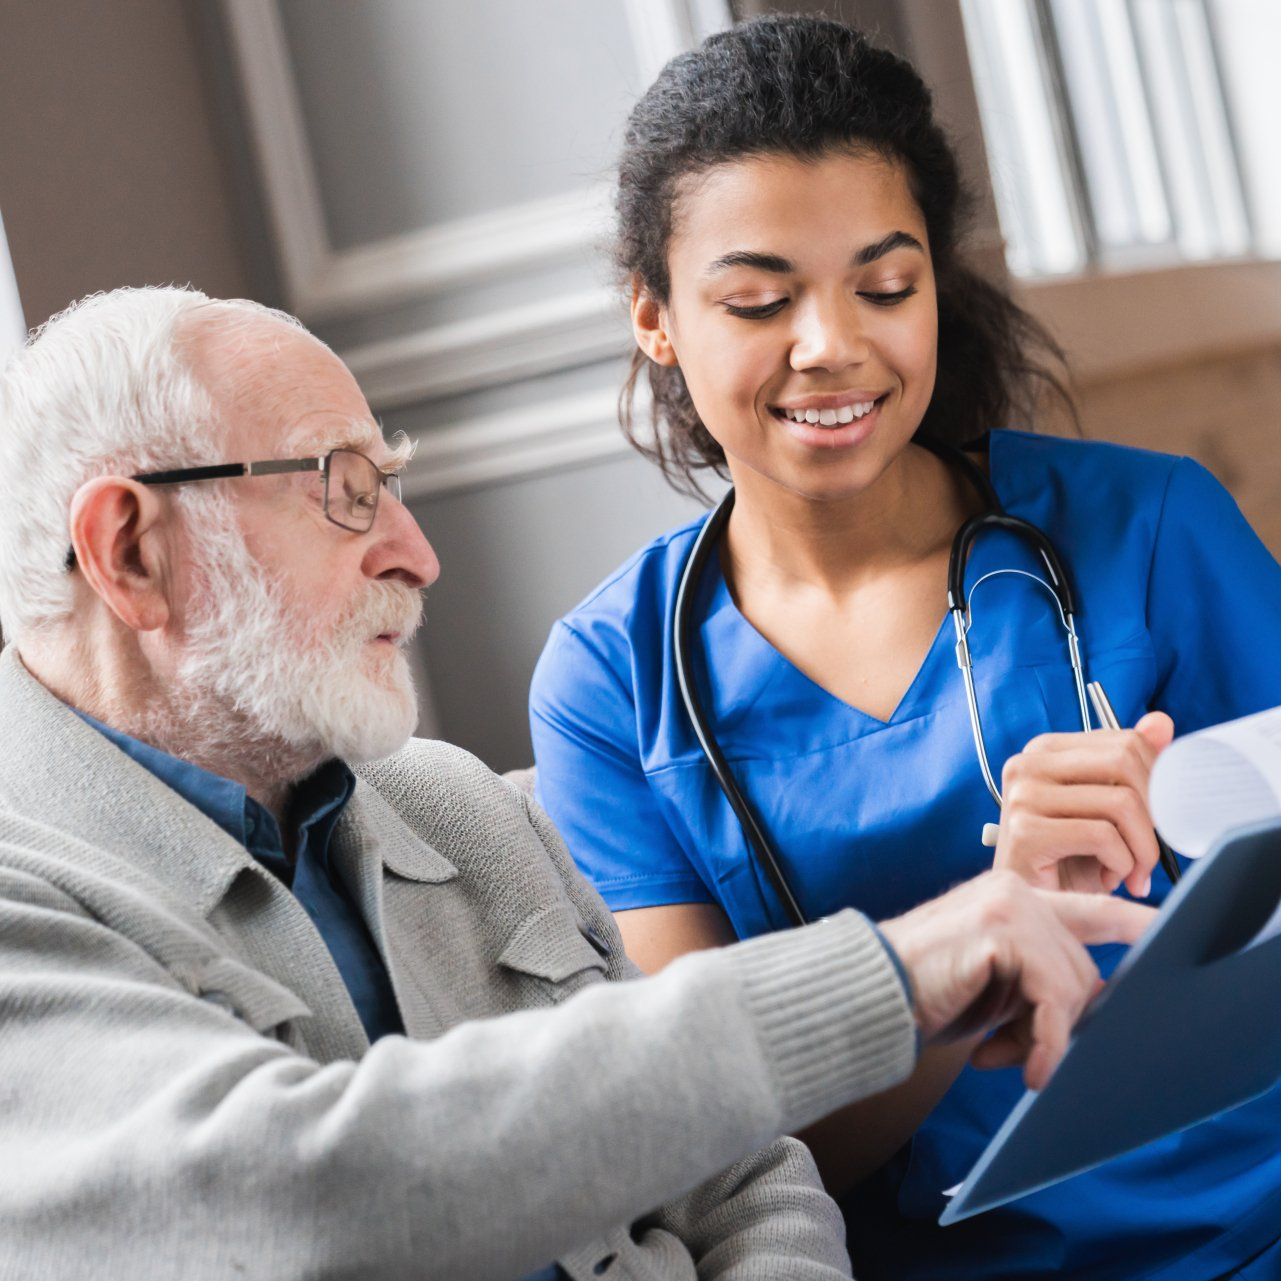 stock-photo-senior-man-elderly-old-patient-and-young-woman-caregiver-medical-worker-in-uniform-hold-clipboard-1952019457-c0690093